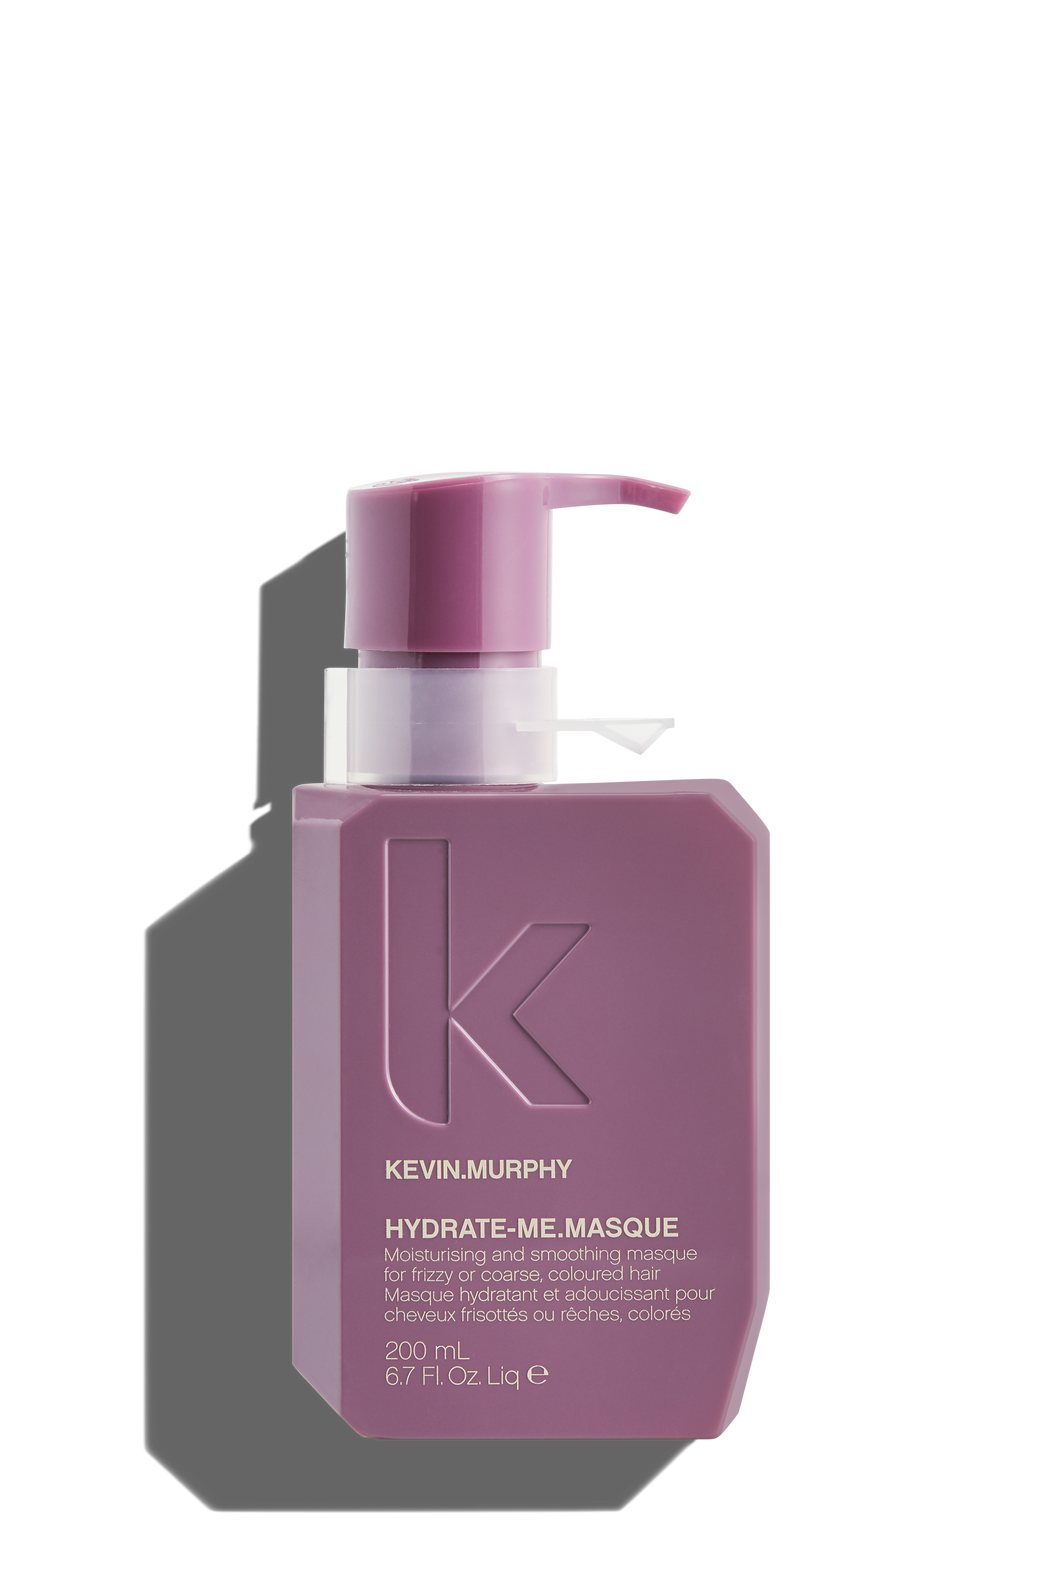 KEVIN.MURPHY- HYDRATE-ME.MASQUE